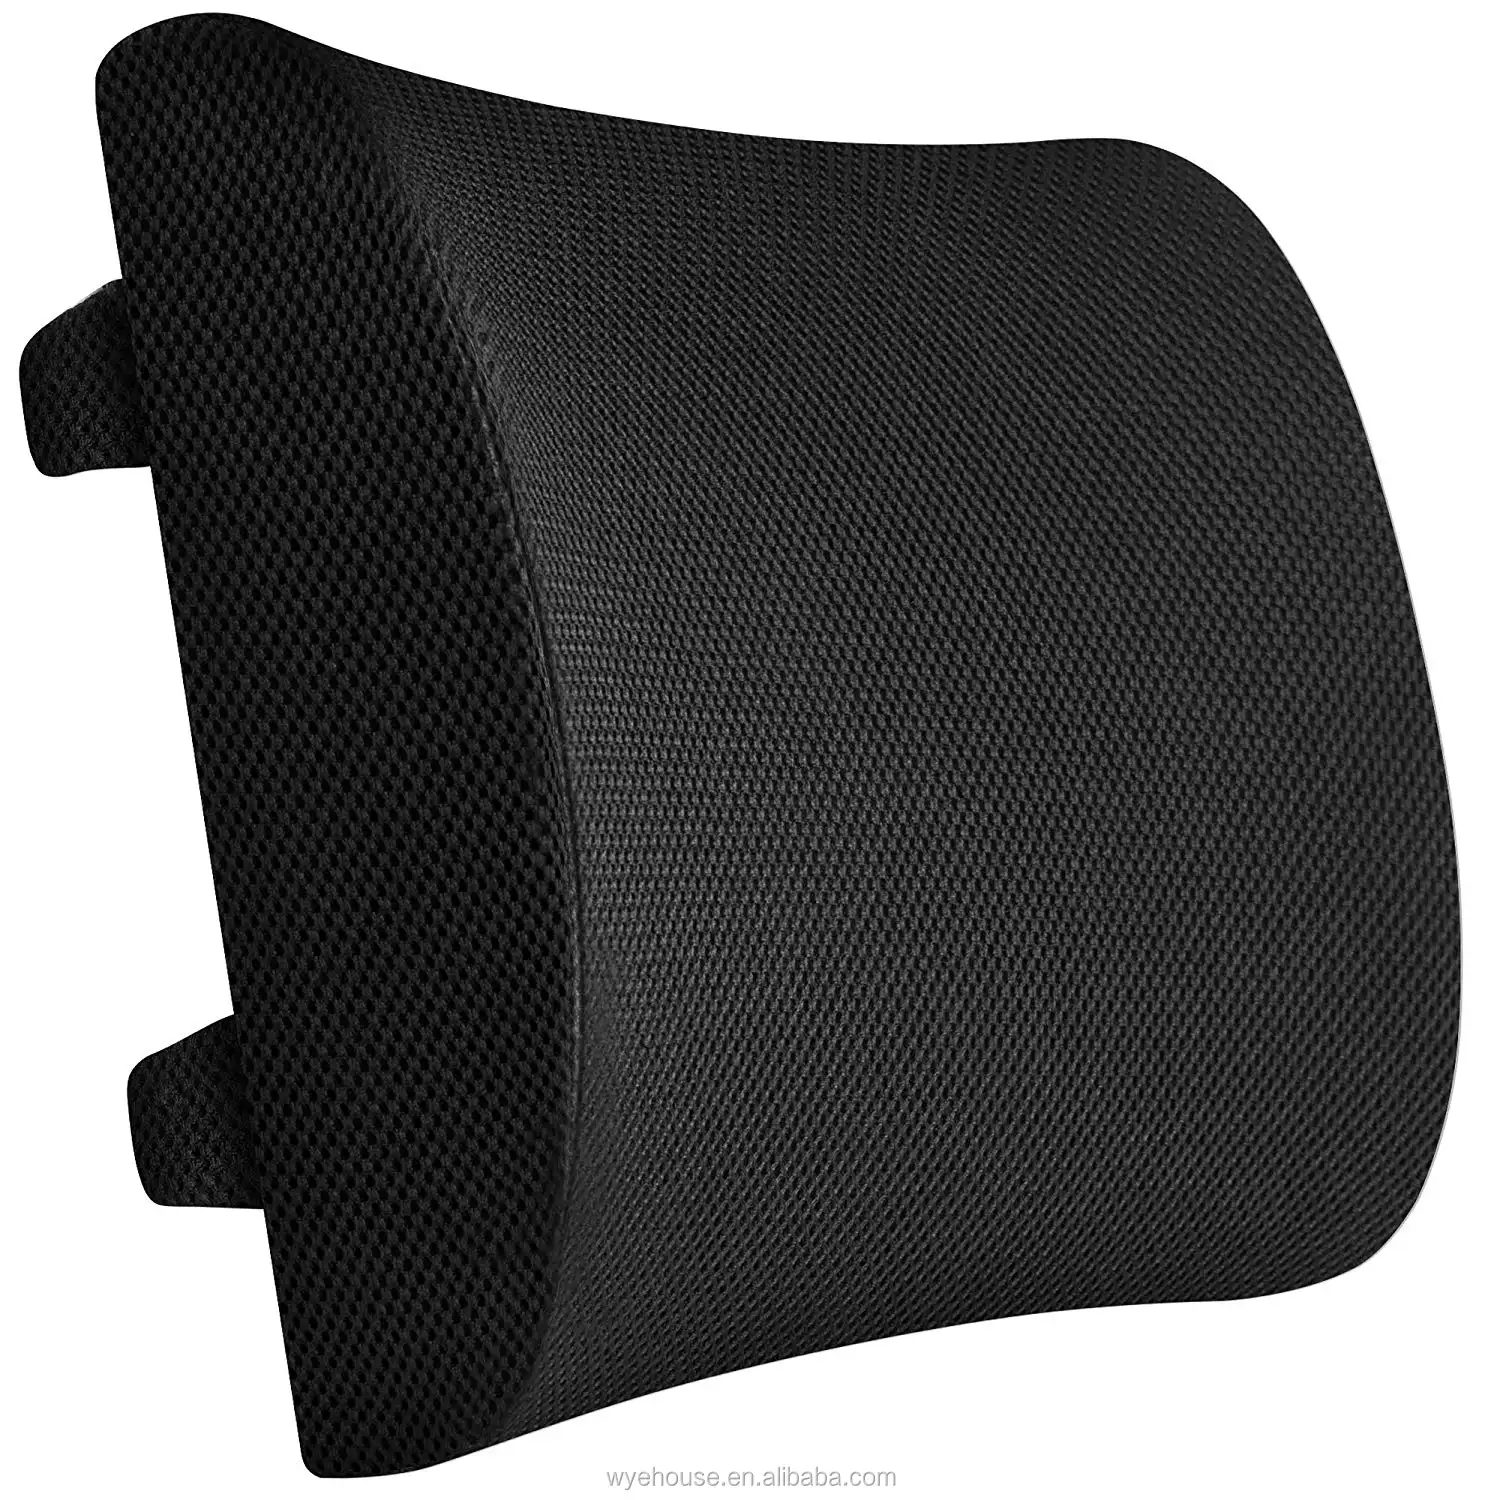 Best Selling Lumbar Support Pillow Memory Foam Back Pillow Cushion for Pain Relief